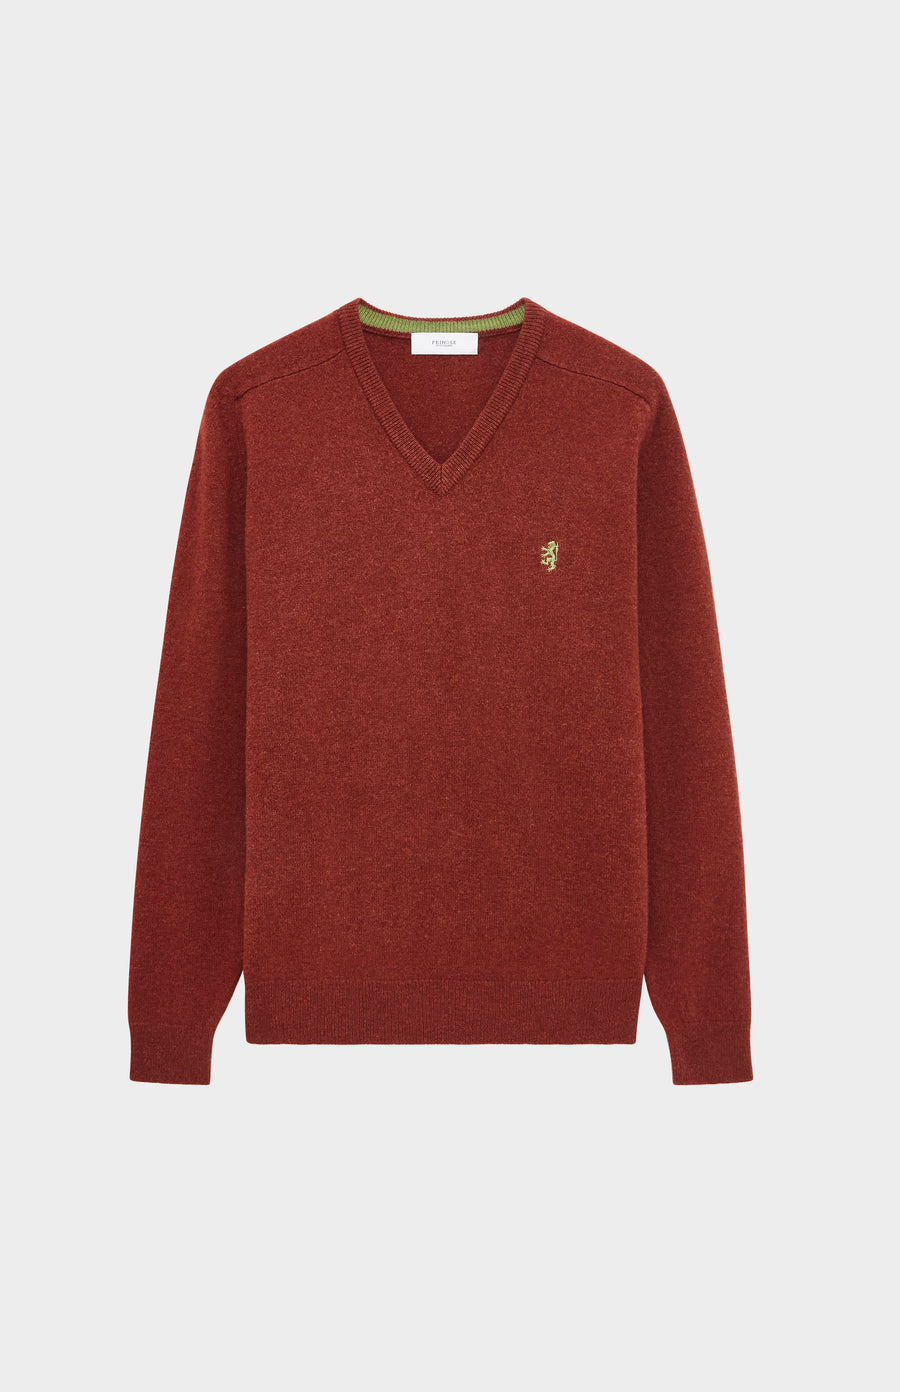 Pringle V Neck Lion Lambswool Jumper In Red Rust & Mineral Green